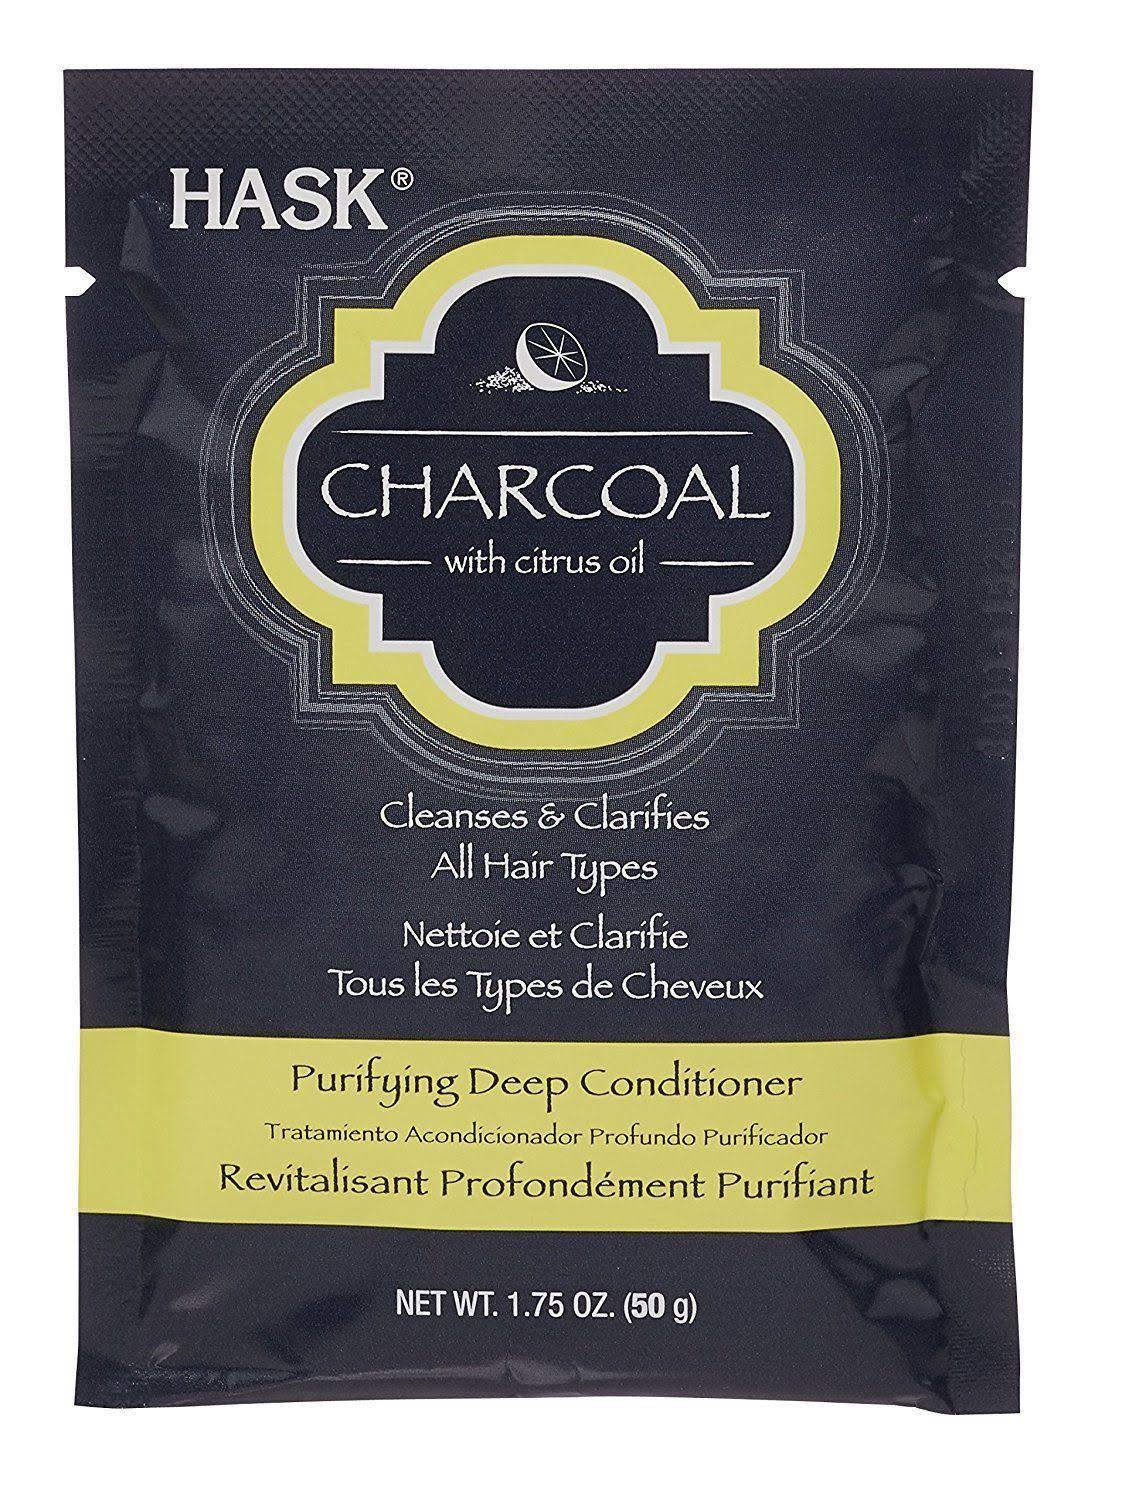 Hask Charcoal Purifying Deep Conditioner - 1.75oz